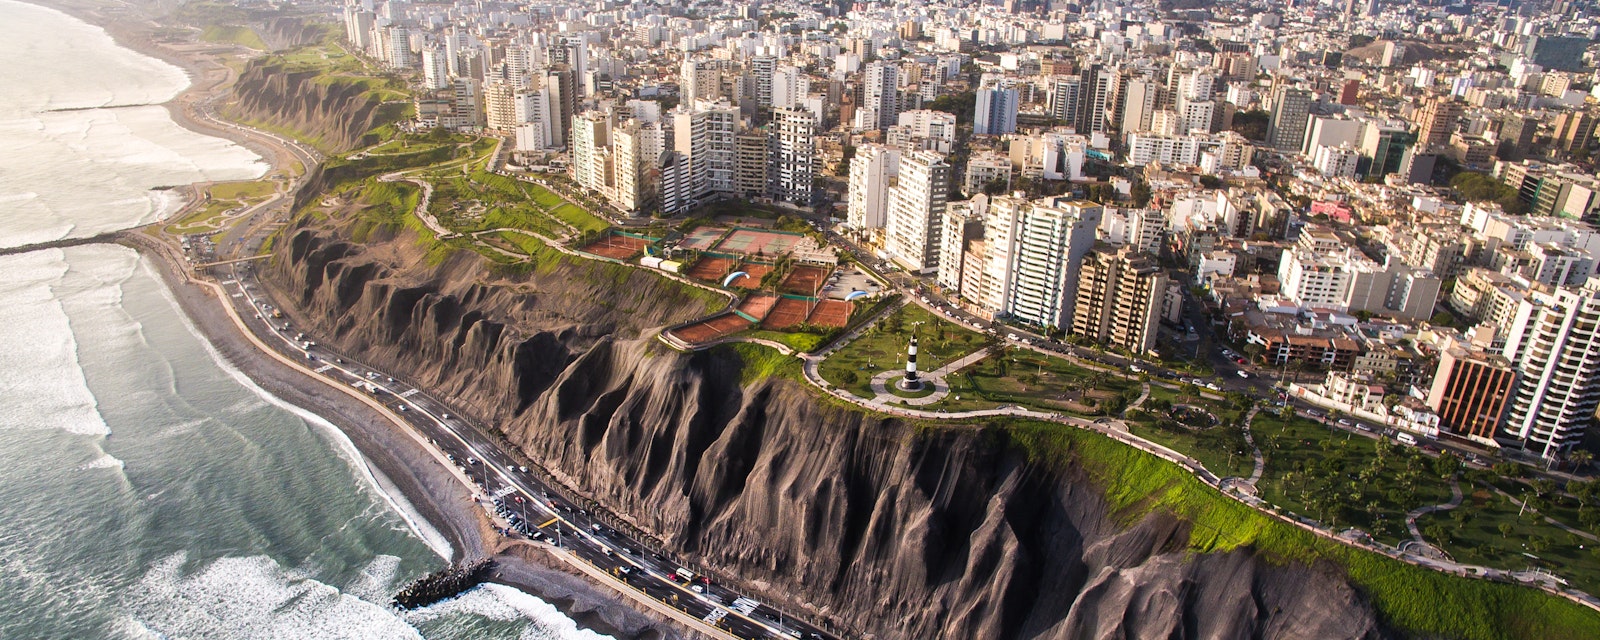 Lima,,Peru:,Panoramic,View,Of,Lima,From,Miraflores.